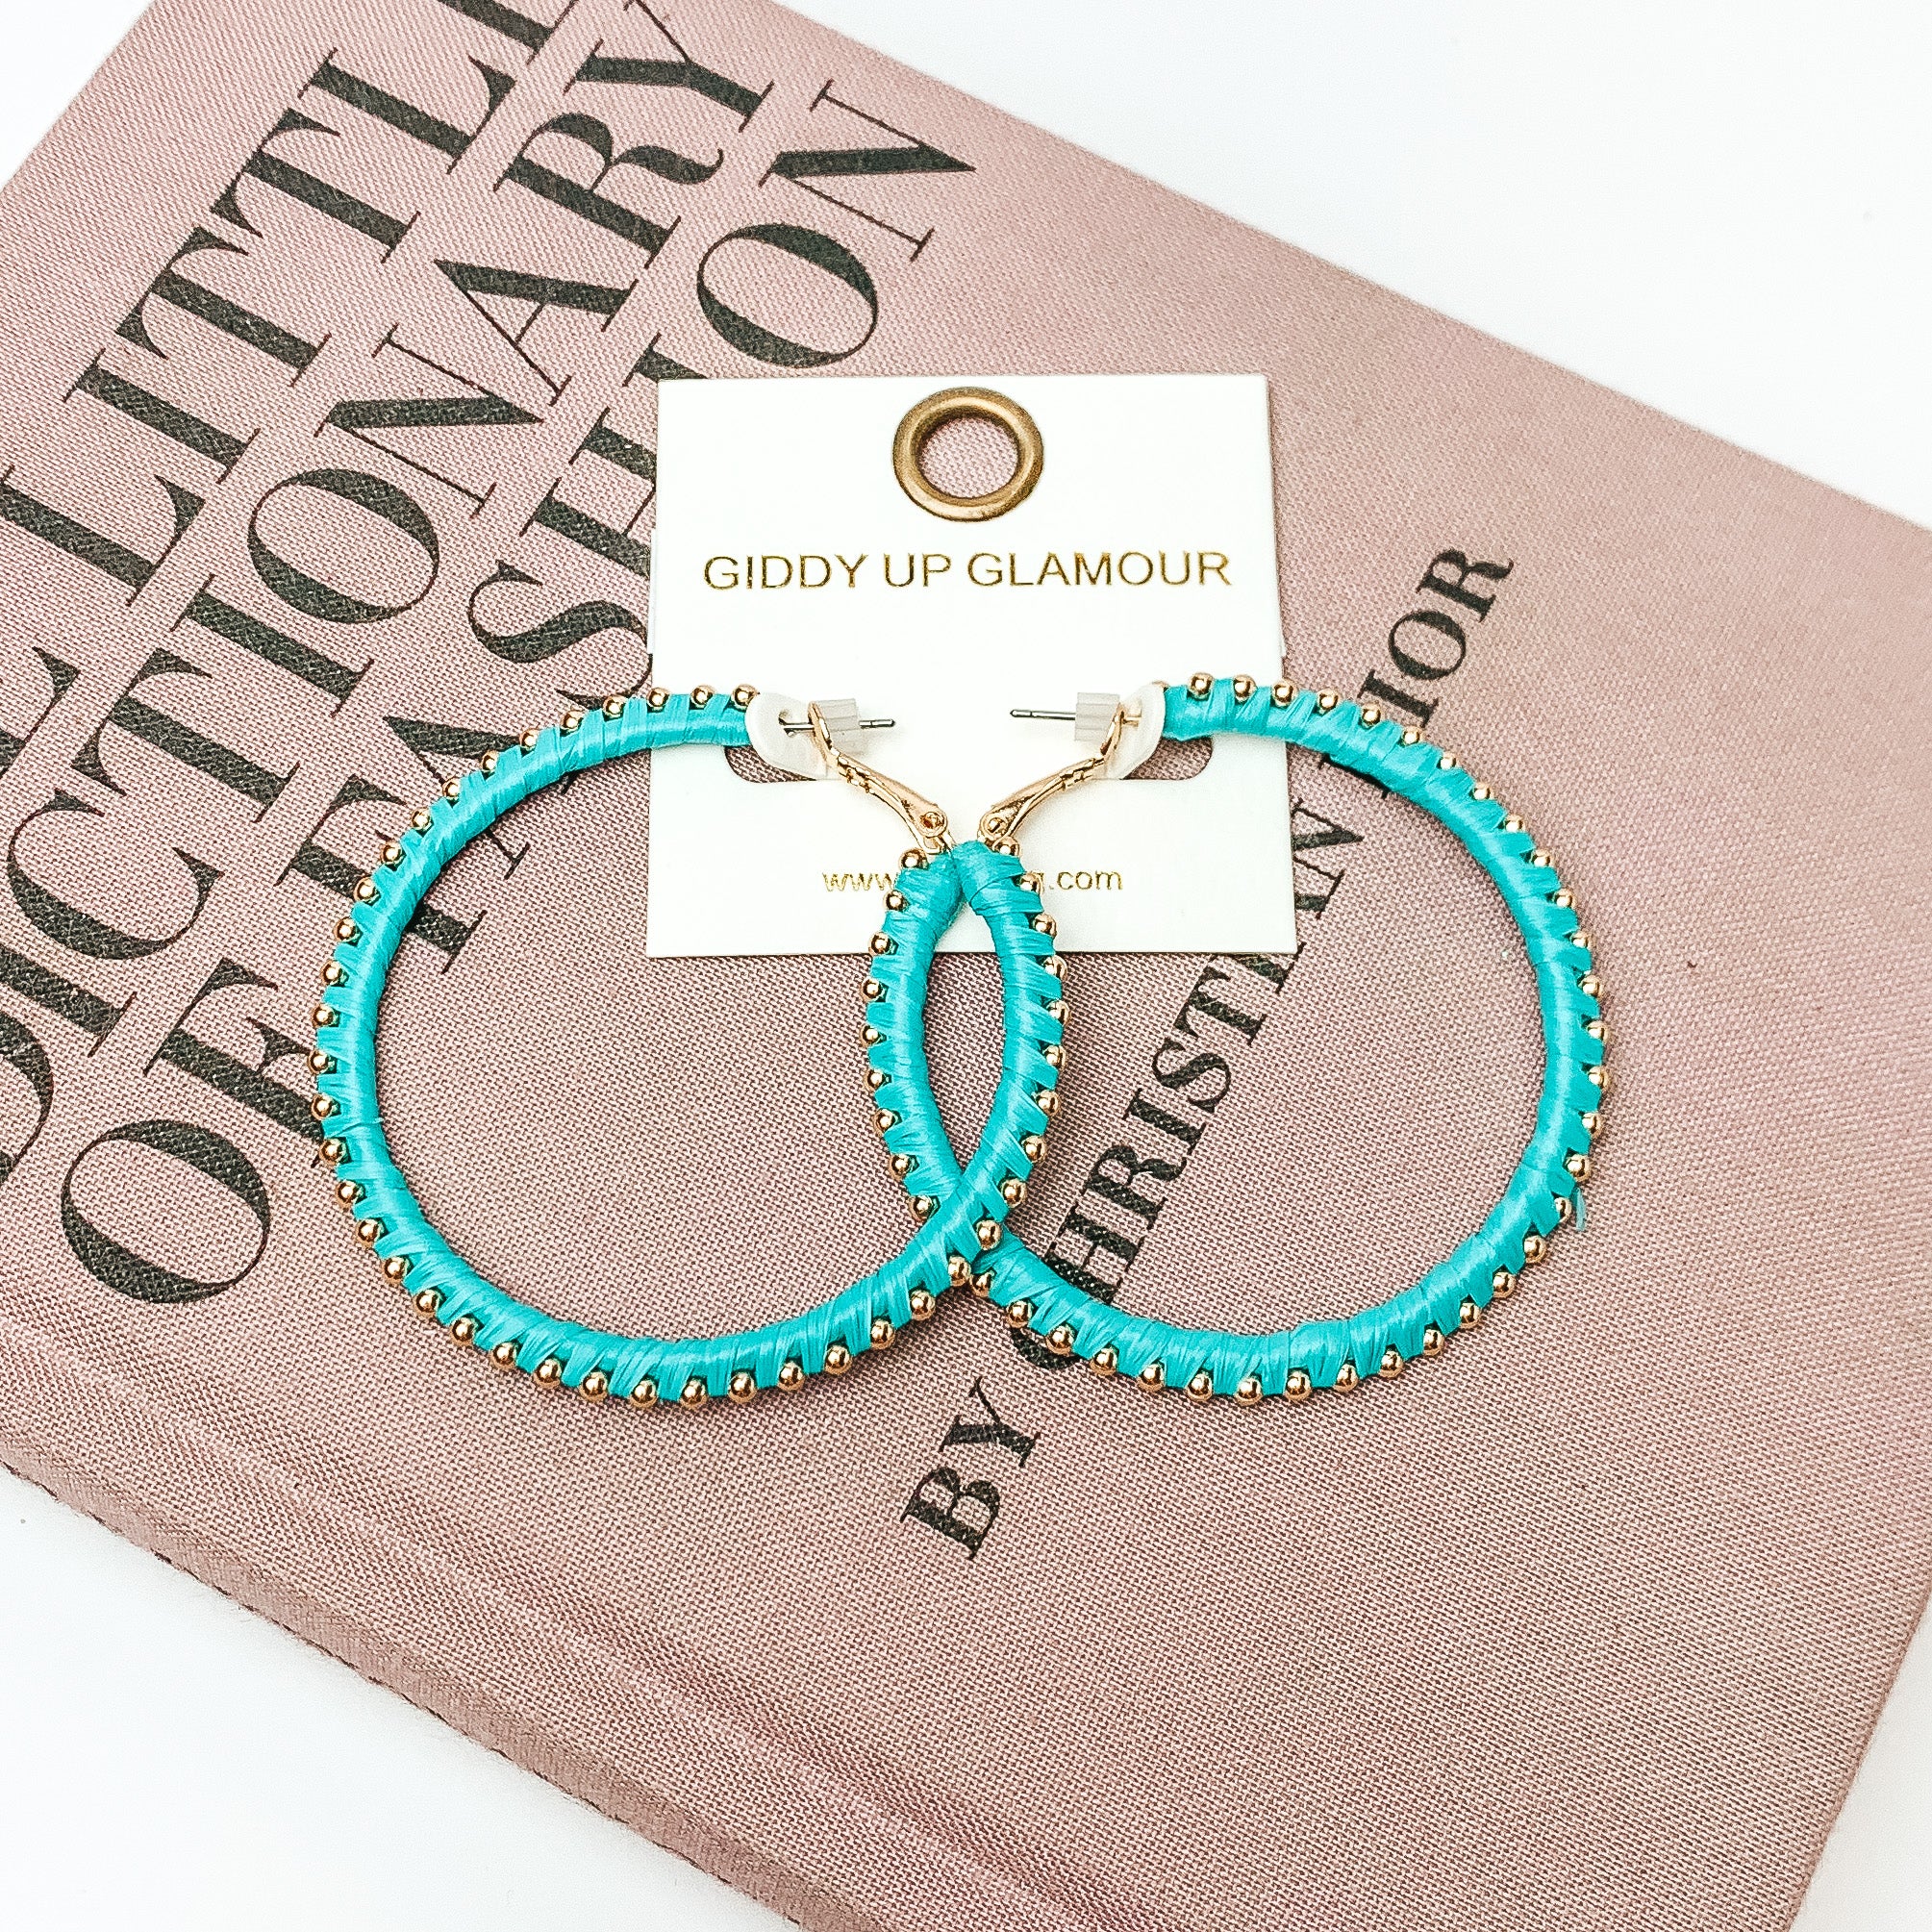 Pictured are circle turquoise hoop earrings with gold beads around it. They are pictured with a pink fashion journal on a white background.